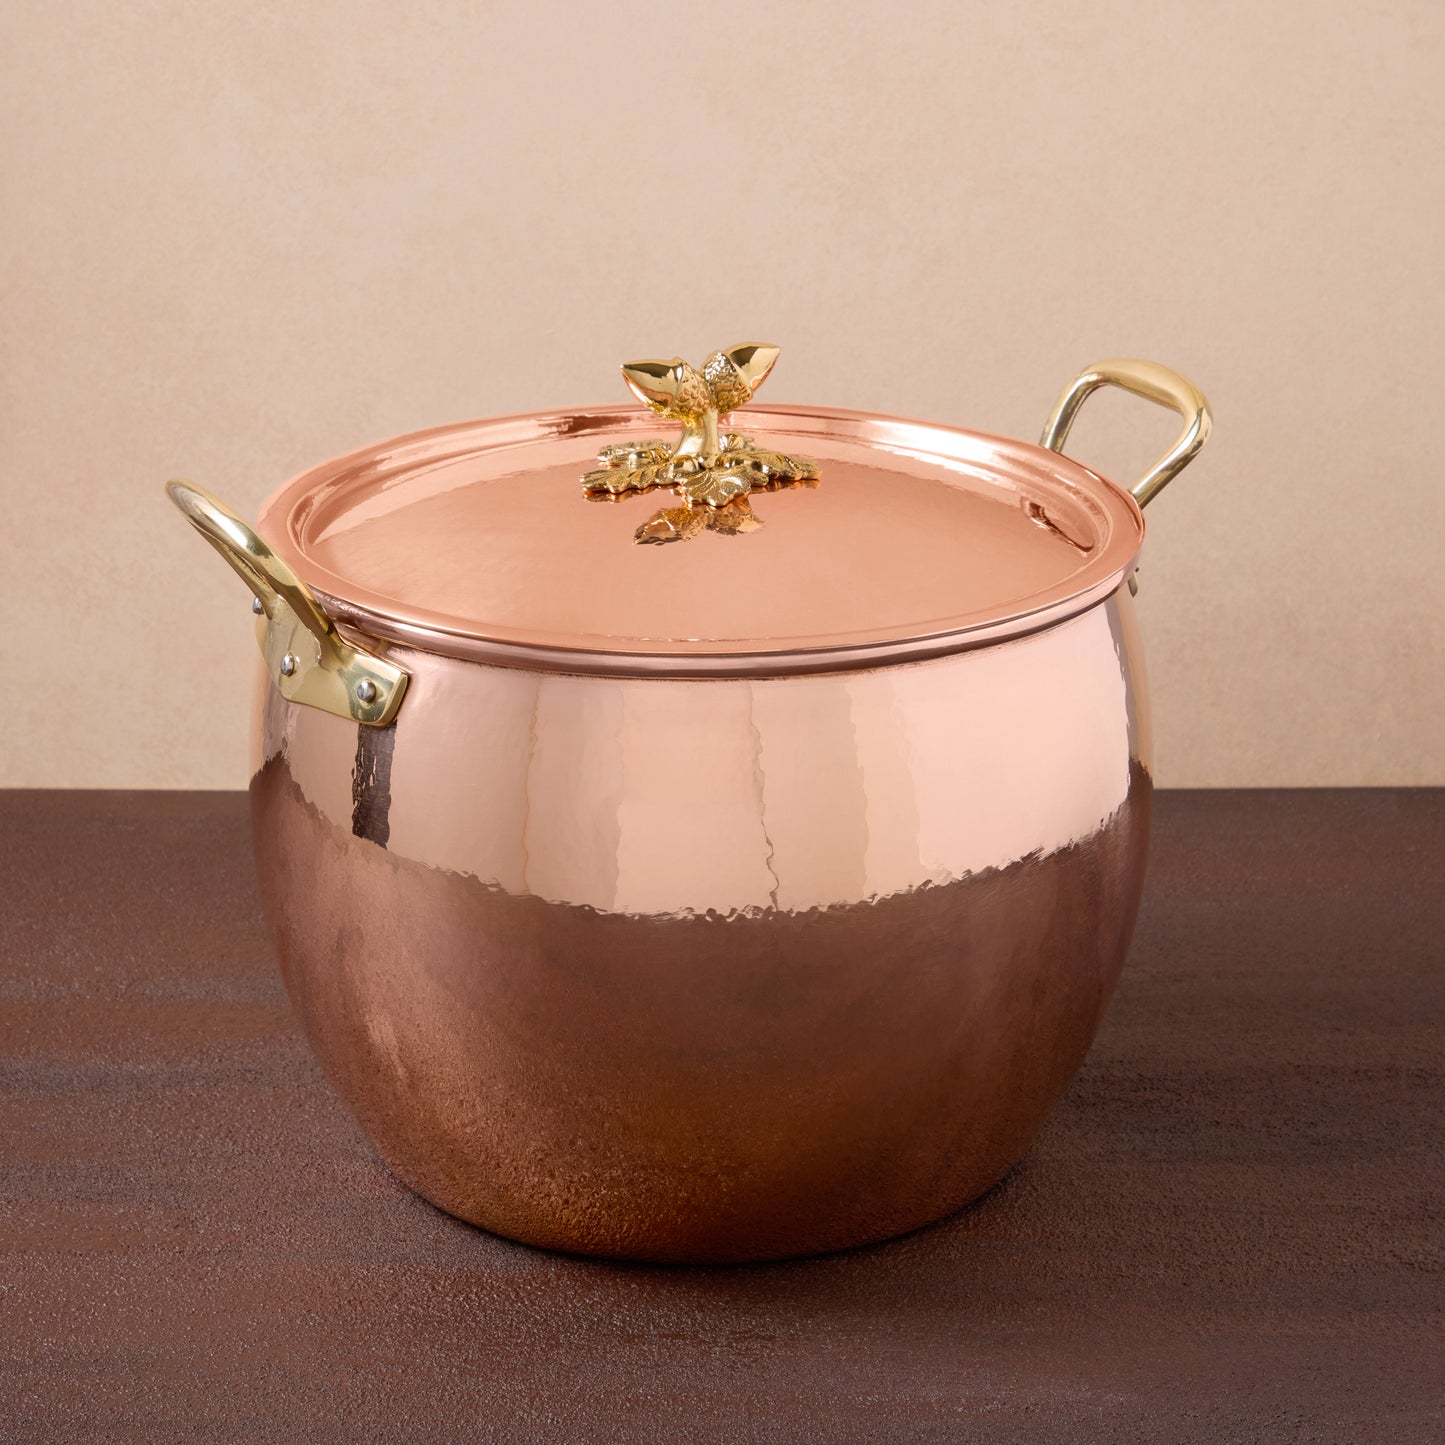 Hammered copper 14 Qt Stockpot lined with high purity tin applied by hand over fire and bronze handles, from Ruffoni Historia collection